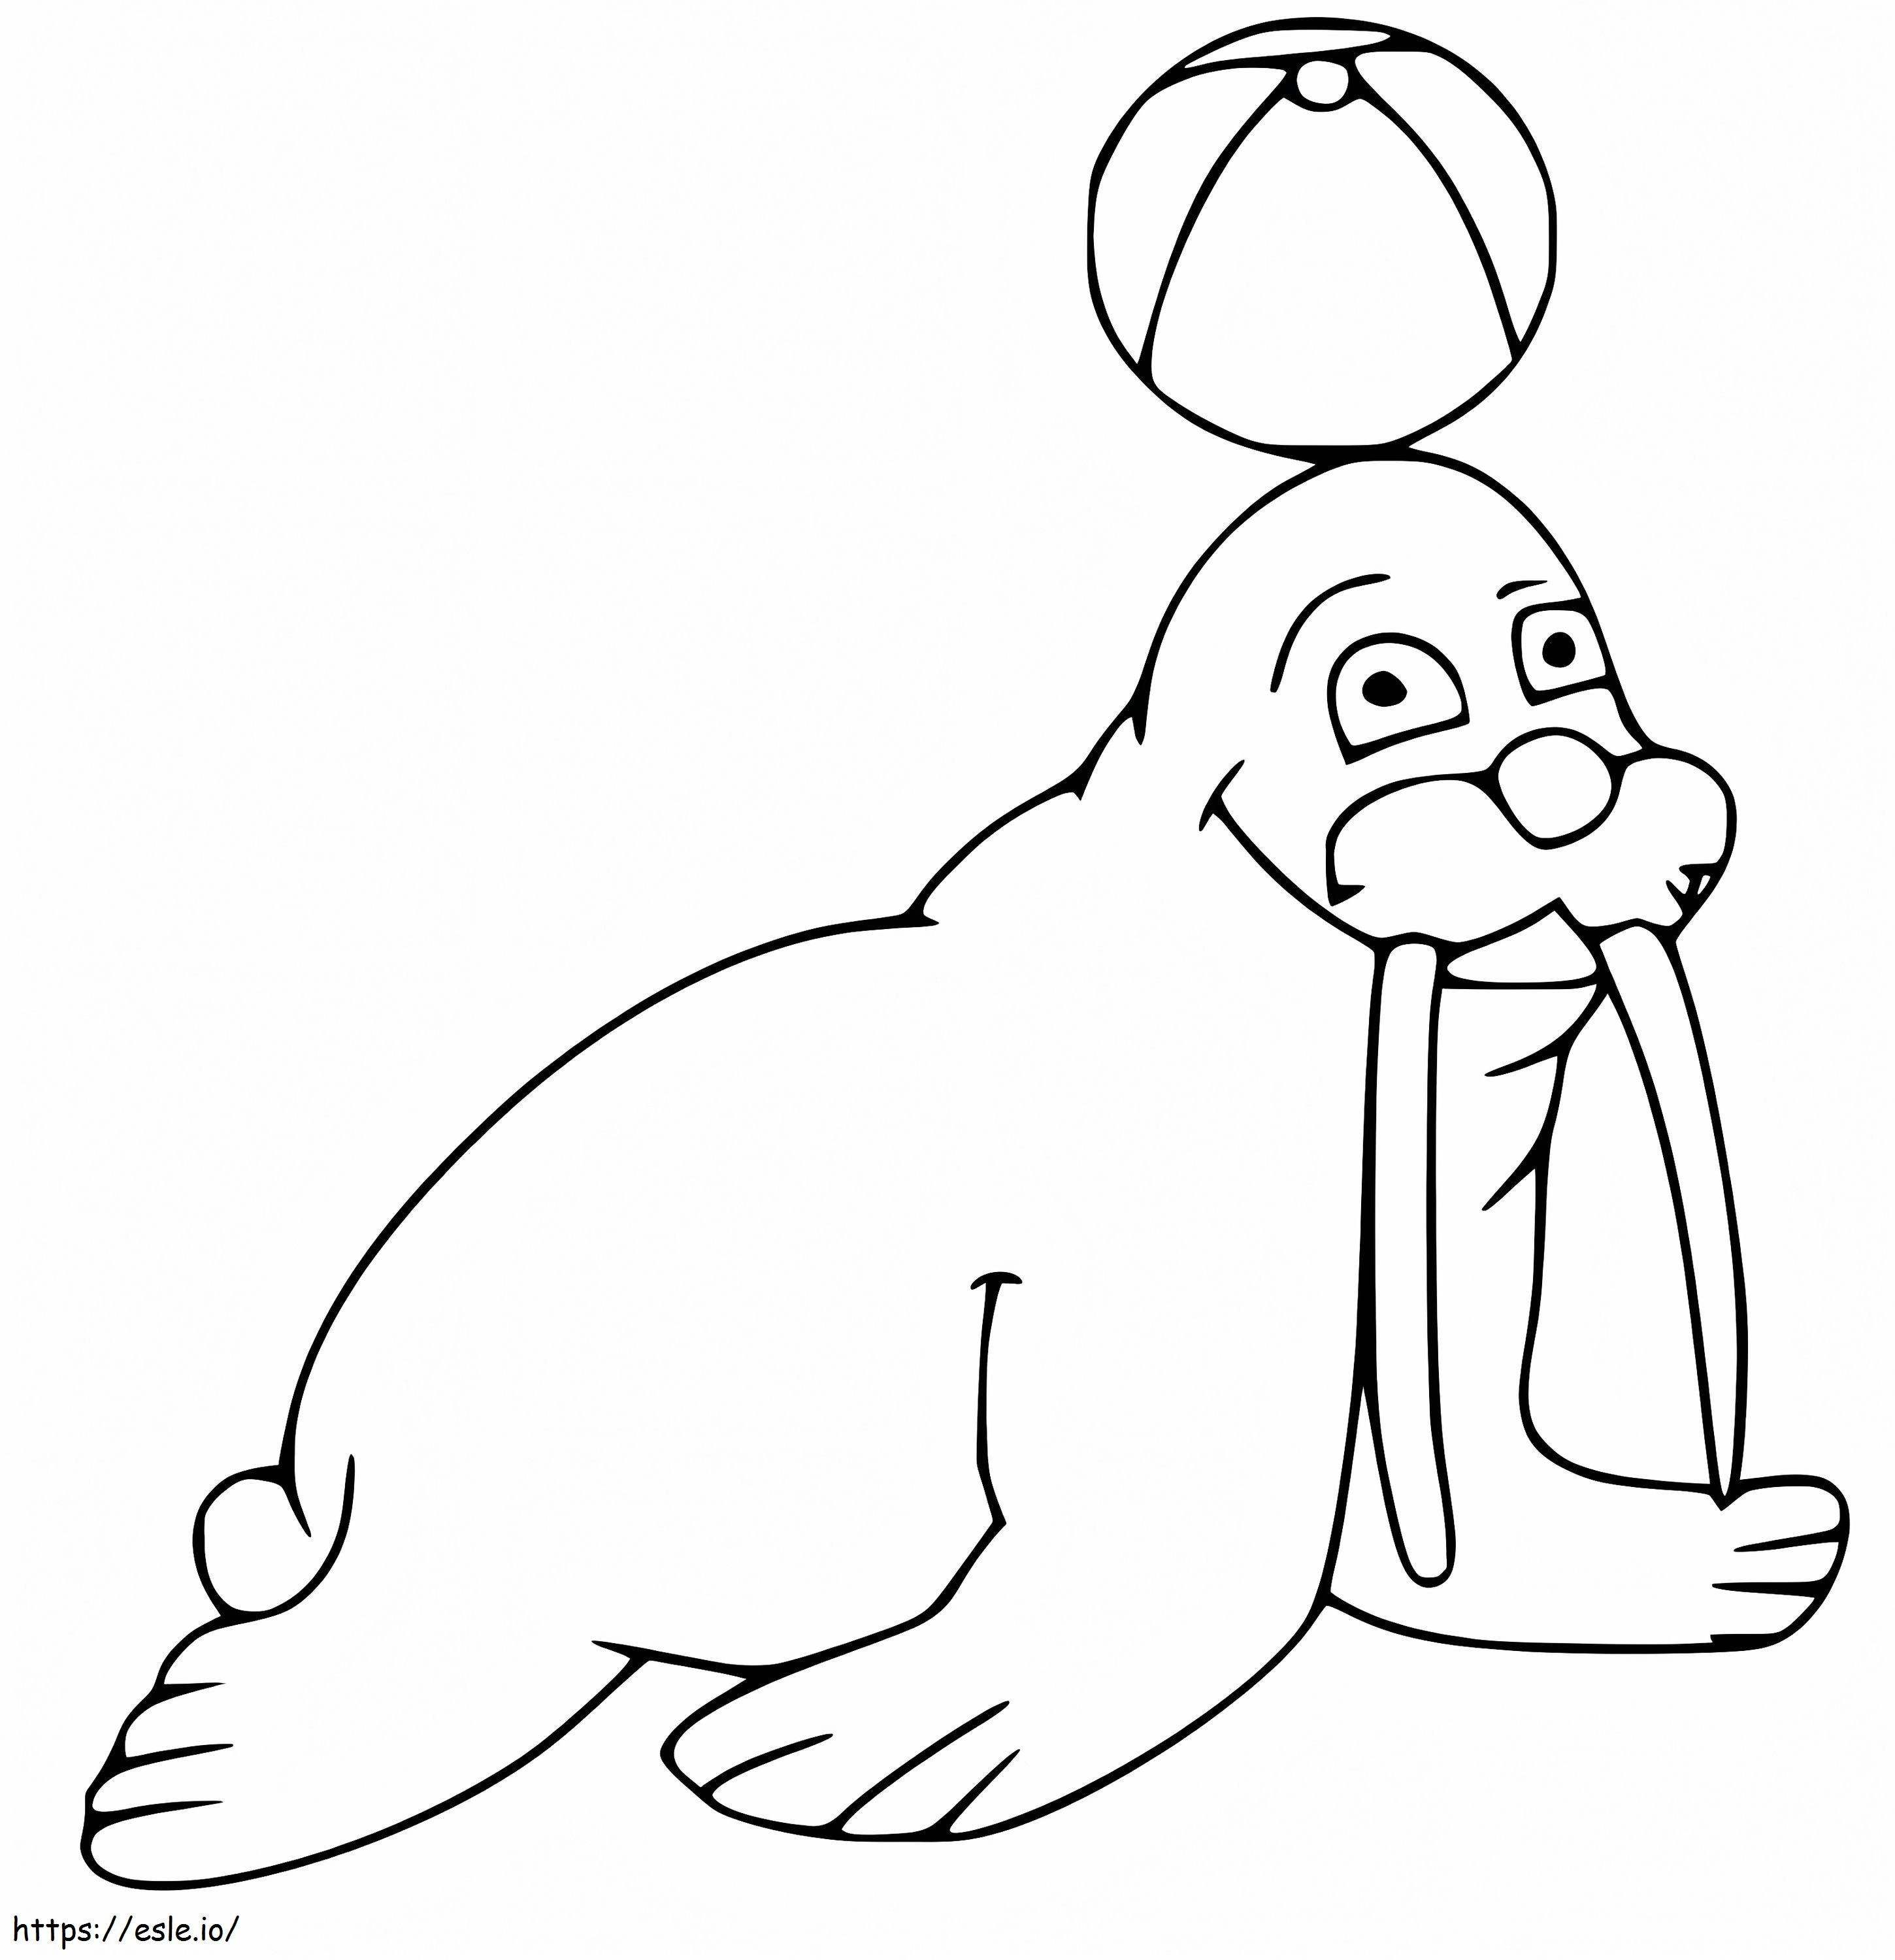 Walrus And Ball coloring page